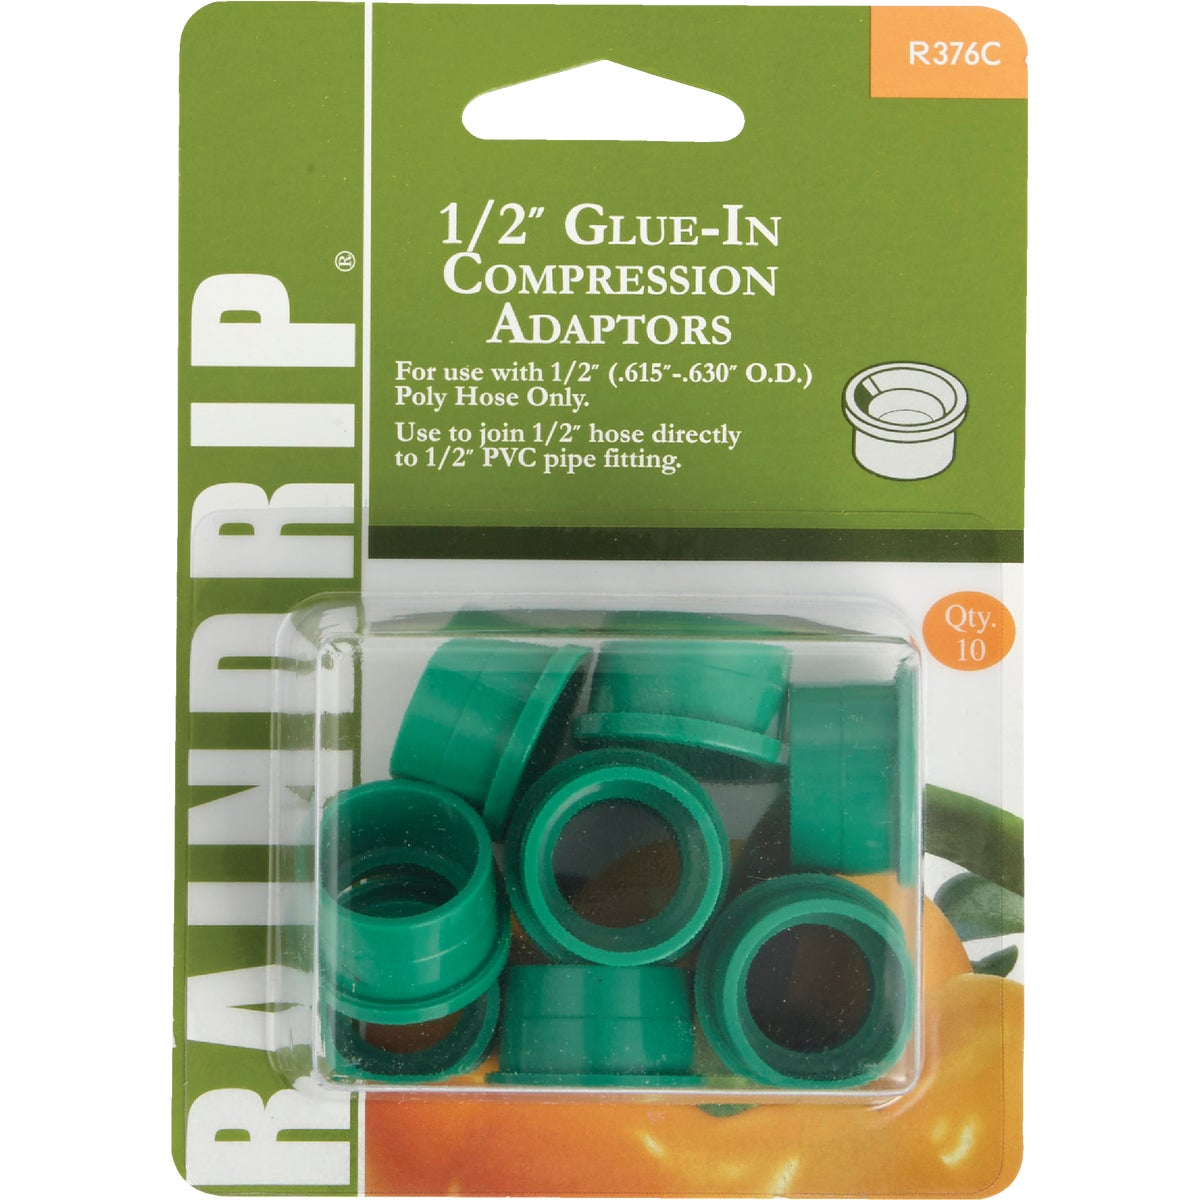 Item 704584, Glue-in compression adapter glues PVC (polyvinyl chloride) fitting to 